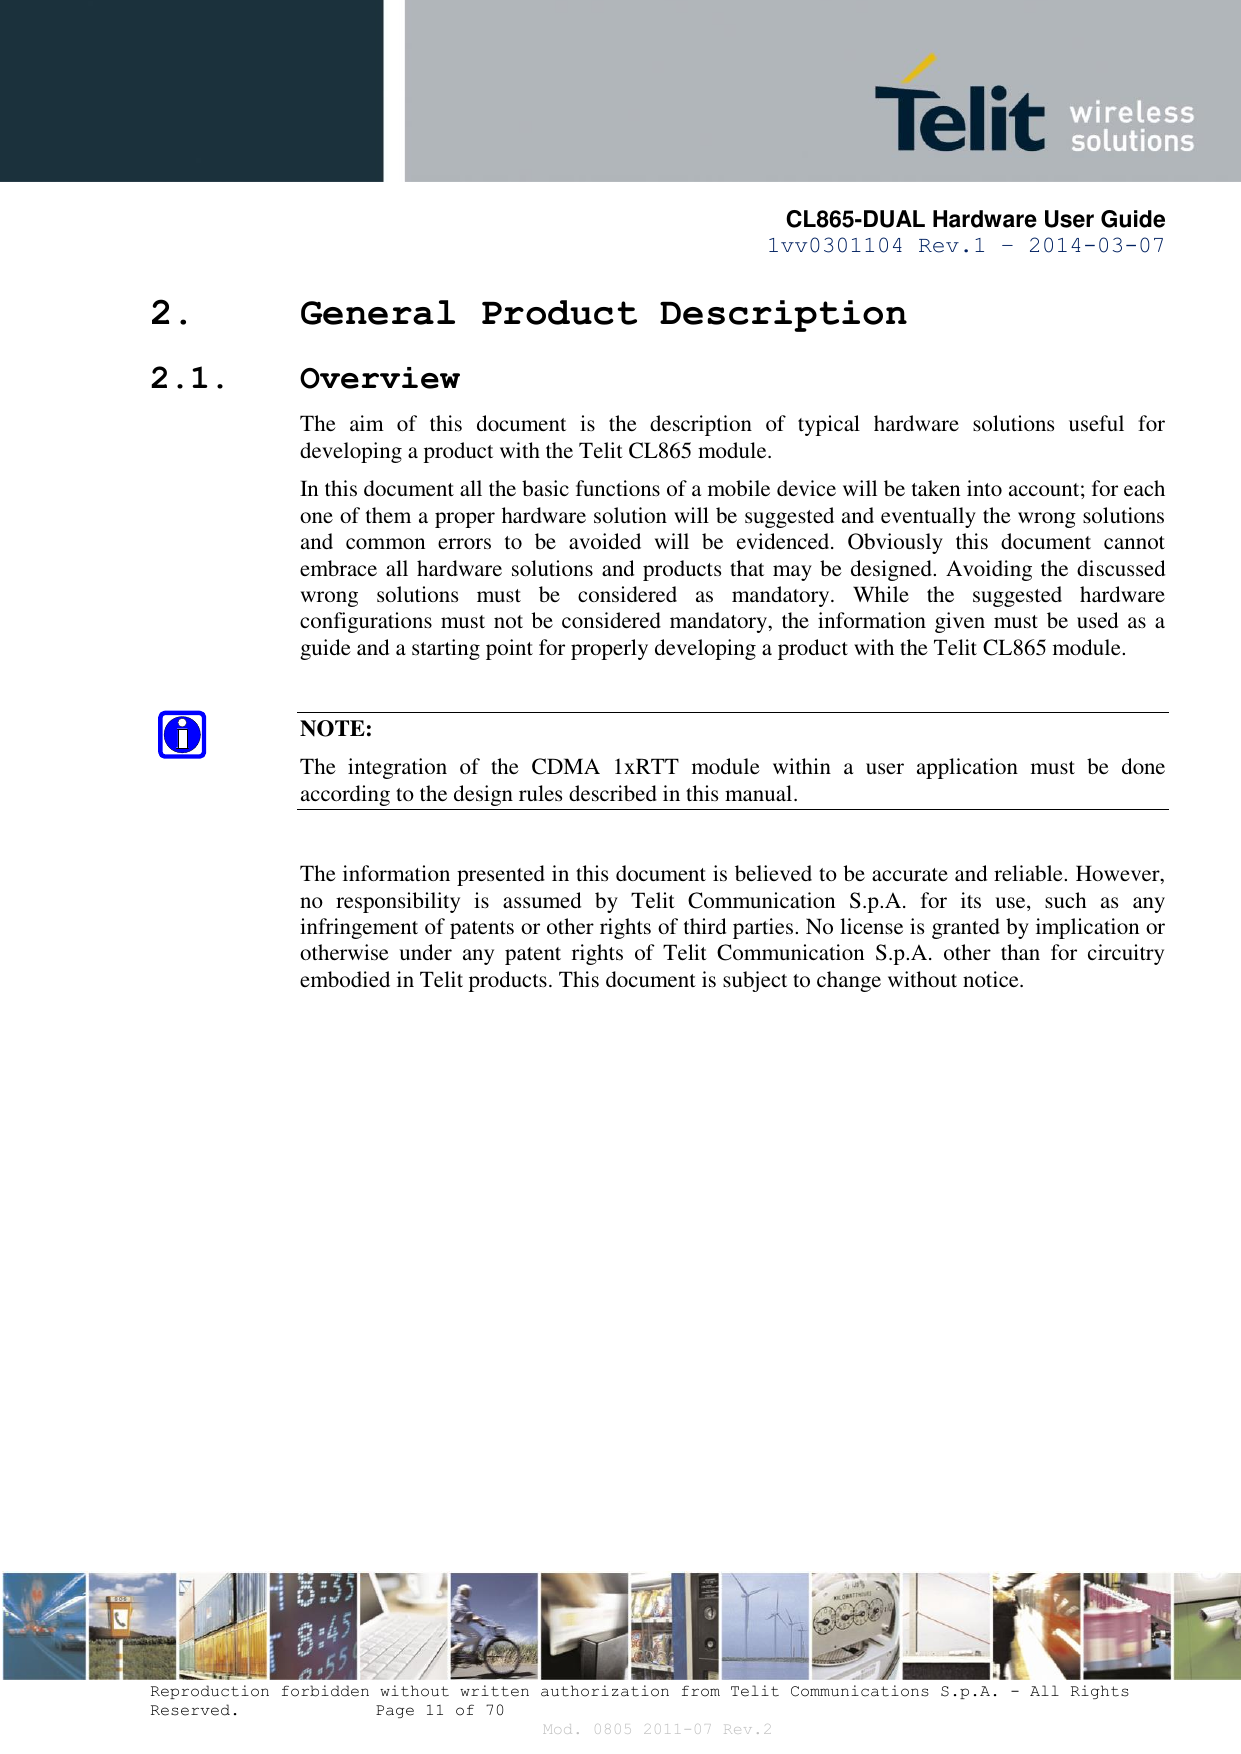       CL865-DUAL Hardware User Guide 1vv0301104 Rev.1 – 2014-03-07  Reproduction forbidden without written authorization from Telit Communications S.p.A. - All Rights Reserved.    Page 11 of 70 Mod. 0805 2011-07 Rev.2 2. General Product Description 2.1. Overview The  aim  of  this  document  is  the  description  of  typical  hardware  solutions  useful  for developing a product with the Telit CL865 module. In this document all the basic functions of a mobile device will be taken into account; for each one of them a proper hardware solution will be suggested and eventually the wrong solutions and  common  errors  to  be  avoided  will  be  evidenced.  Obviously  this  document  cannot embrace all hardware solutions and products that may be designed. Avoiding the discussed wrong  solutions  must  be  considered  as  mandatory.  While  the  suggested  hardware configurations must not be considered mandatory, the information given must be used as a guide and a starting point for properly developing a product with the Telit CL865 module.  NOTE: The  integration  of  the  CDMA  1xRTT  module  within  a  user  application  must  be  done according to the design rules described in this manual.  The information presented in this document is believed to be accurate and reliable. However, no  responsibility  is  assumed  by  Telit  Communication  S.p.A.  for  its  use,  such  as  any infringement of patents or other rights of third parties. No license is granted by implication or otherwise  under  any  patent  rights  of  Telit  Communication  S.p.A.  other  than  for  circuitry embodied in Telit products. This document is subject to change without notice.              